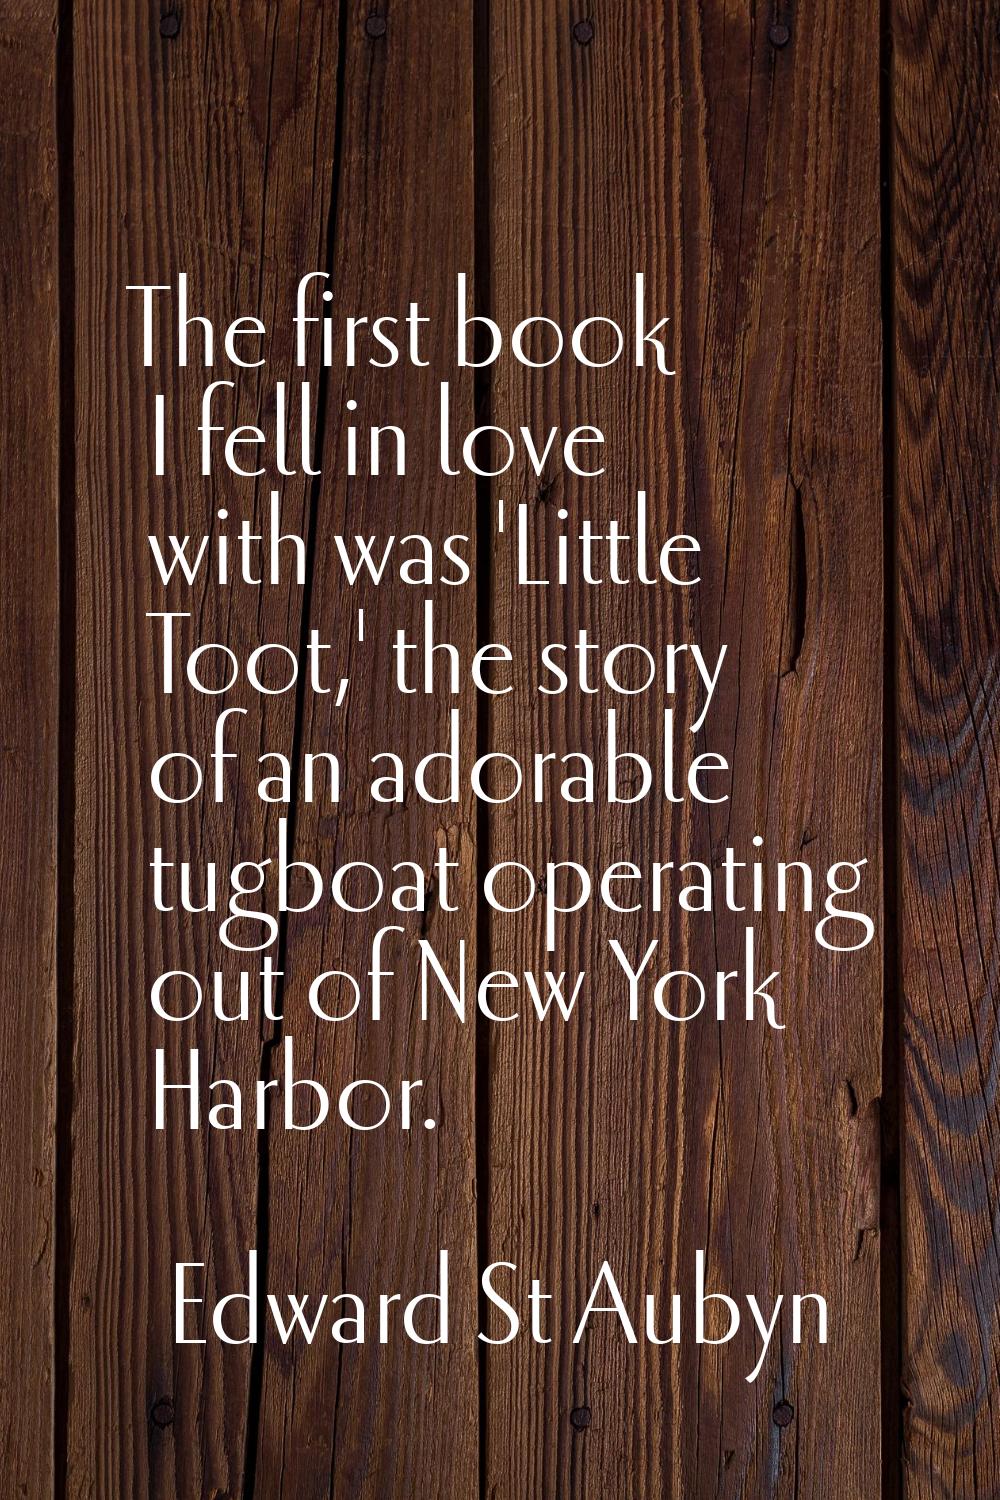 The first book I fell in love with was 'Little Toot,' the story of an adorable tugboat operating ou